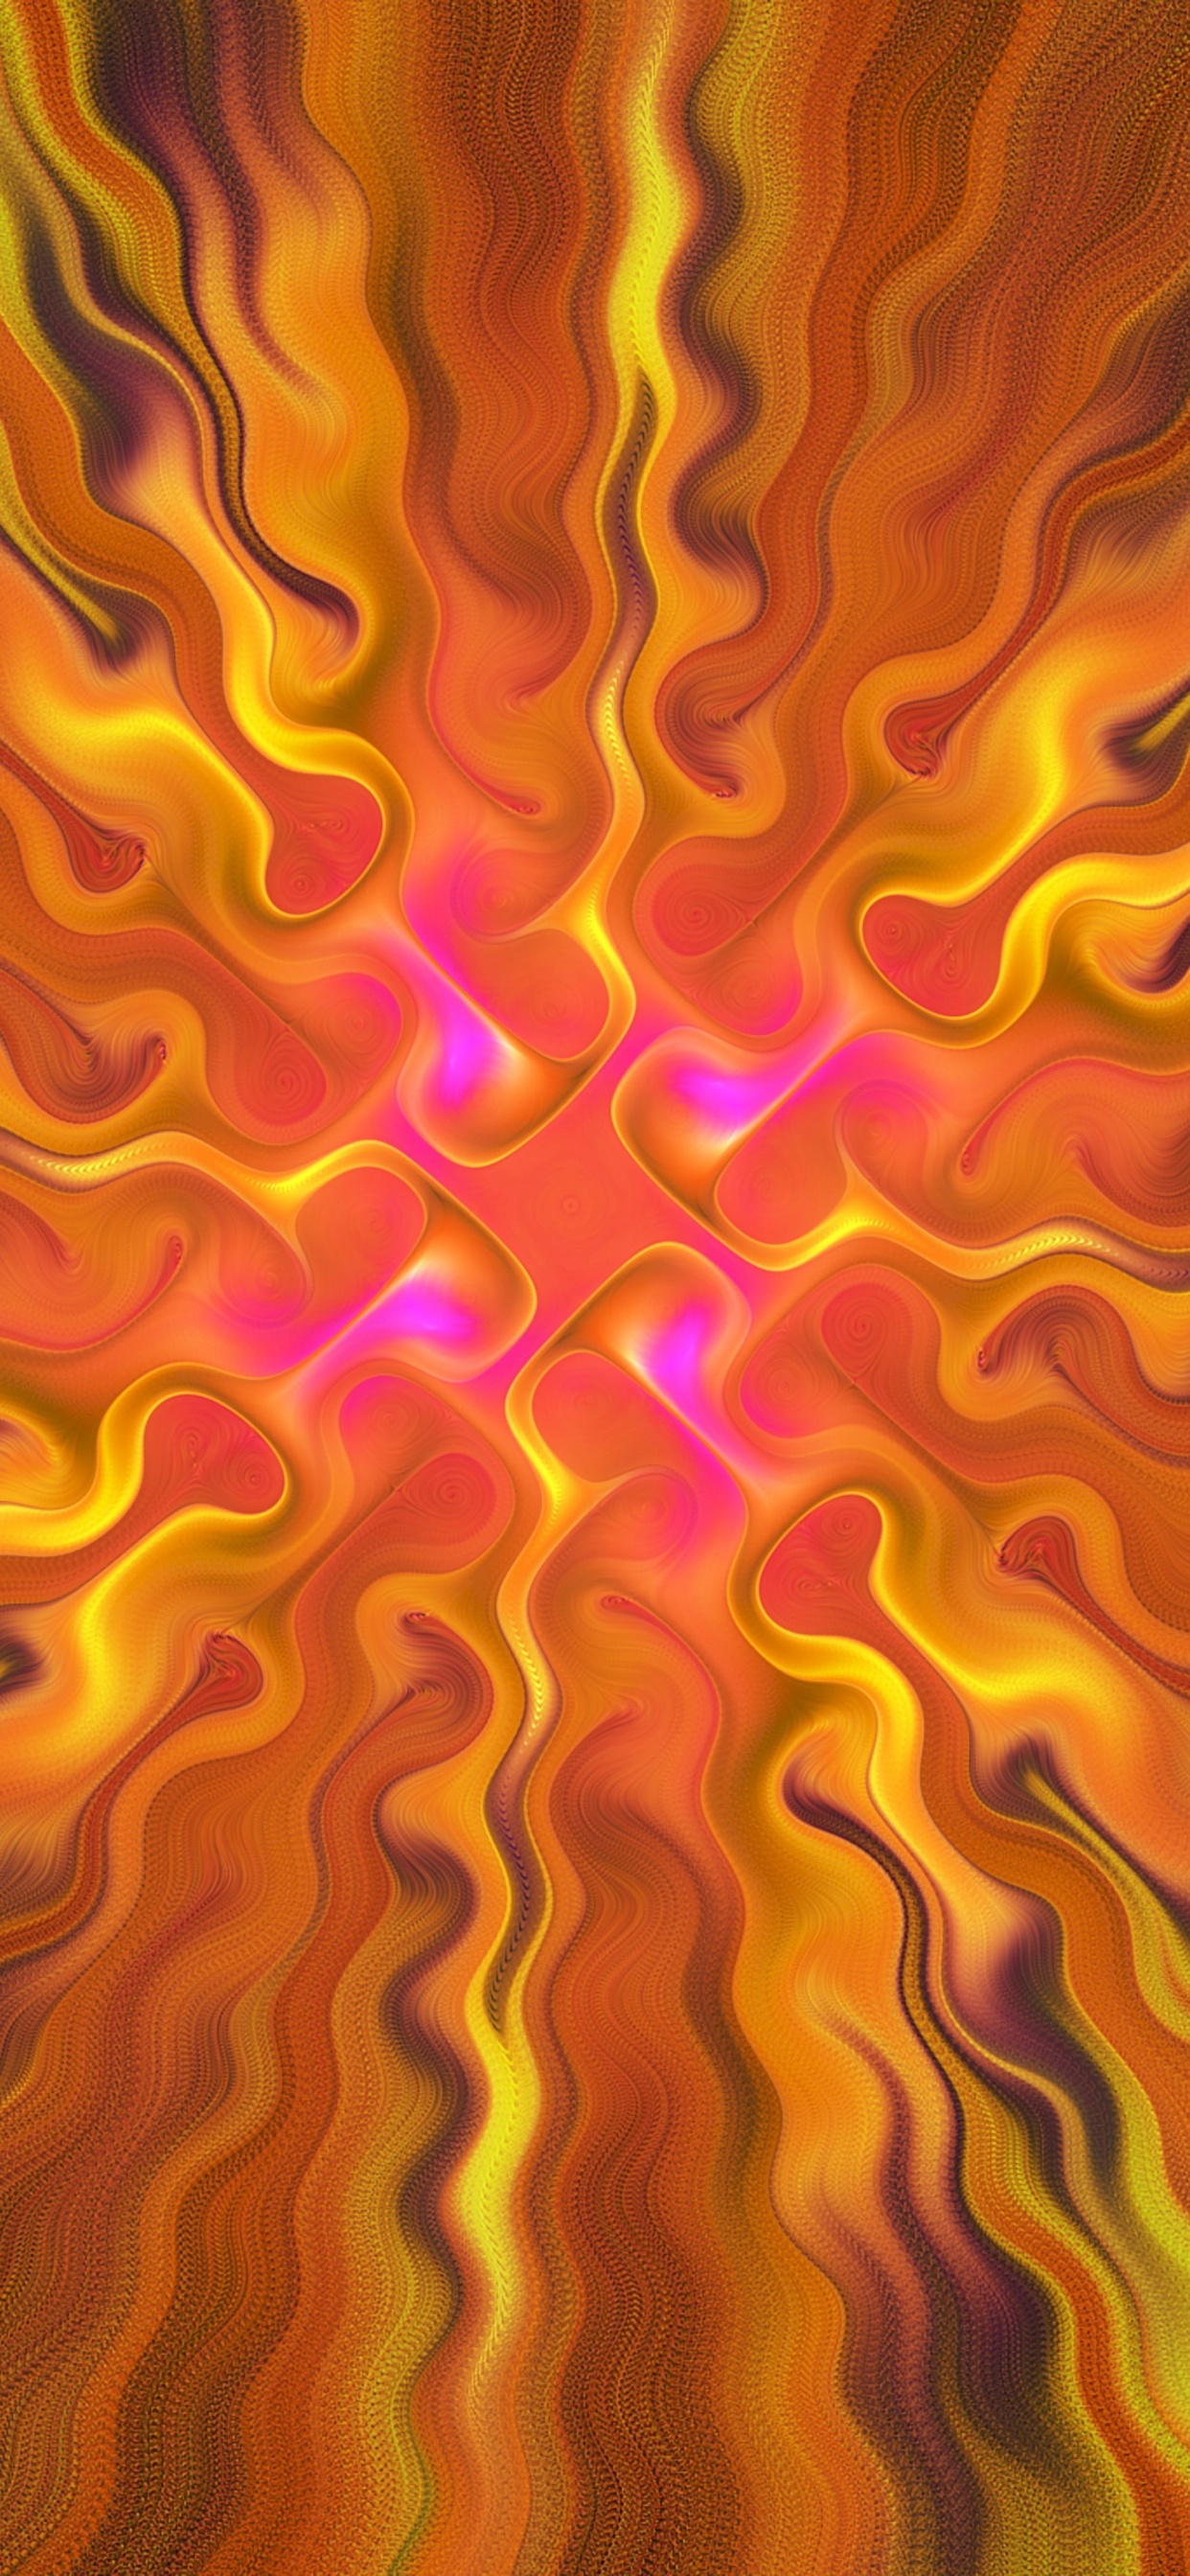 Orange and Yellow Abstract Painting. Wallpaper in 1242x2688 Resolution